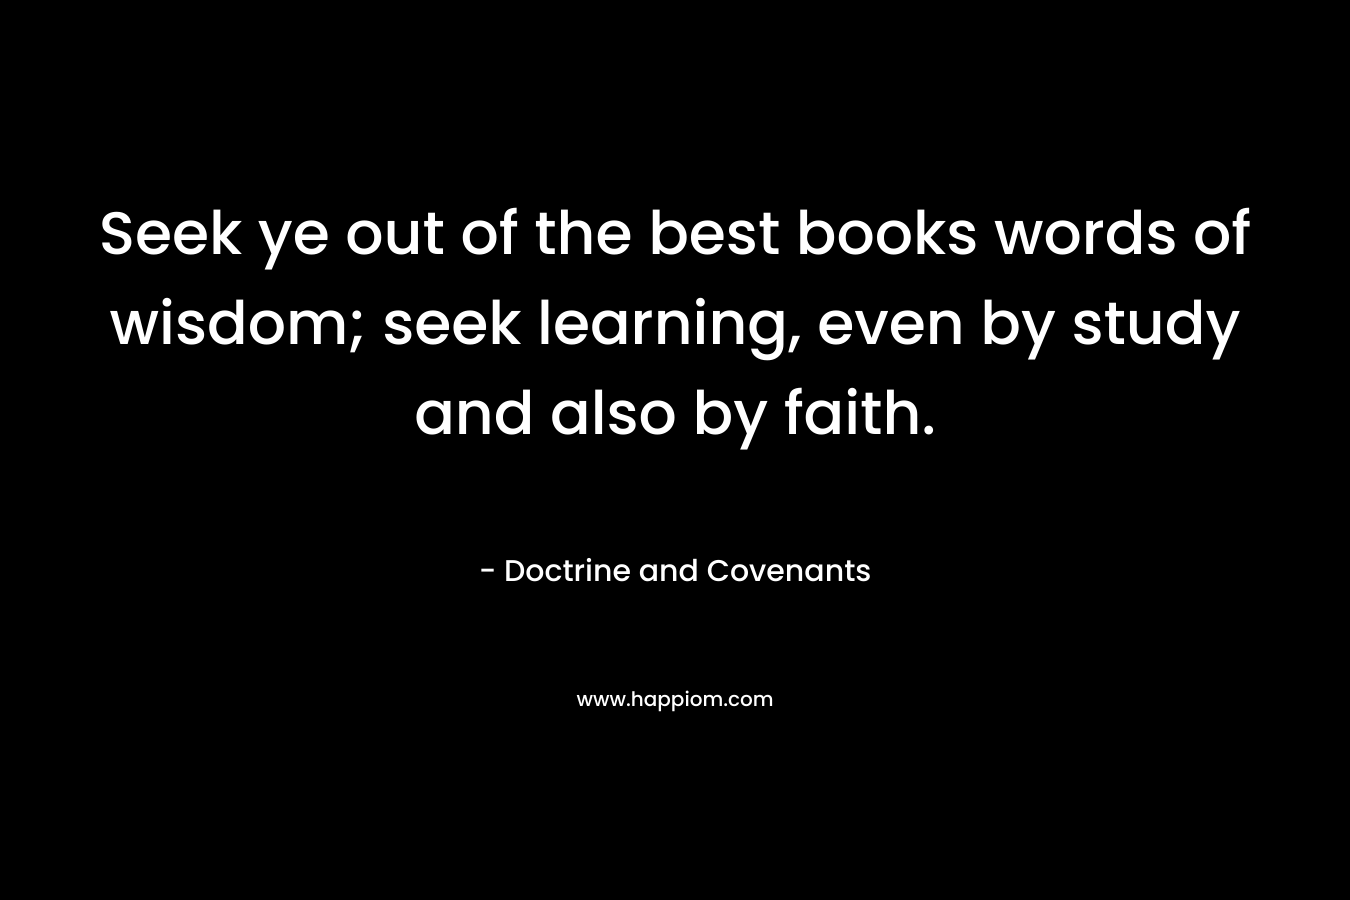 Seek ye out of the best books words of wisdom; seek learning, even by study and also by faith. – Doctrine and Covenants